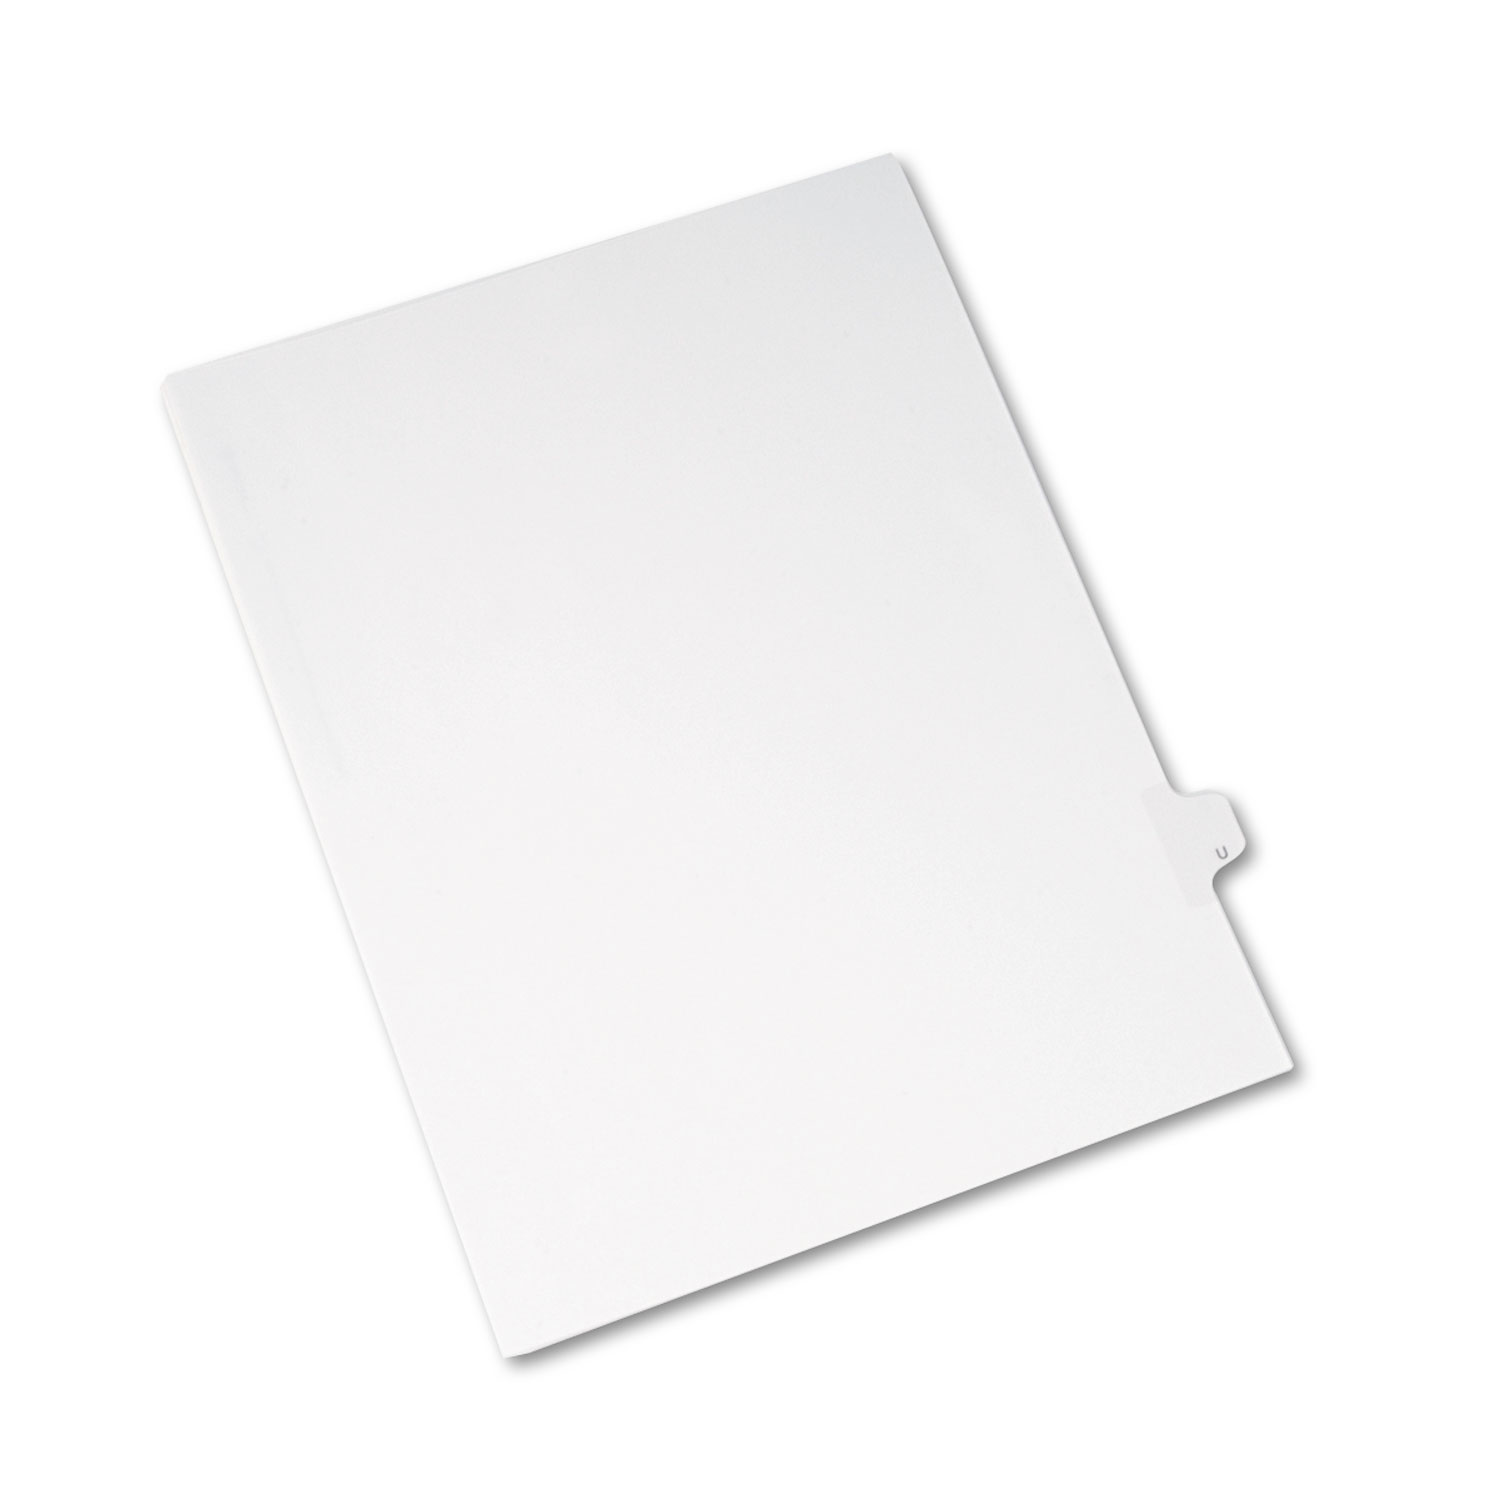 Allstate-Style Legal Exhibit Side Tab Divider, Title: U, Letter, White, 25/Pack